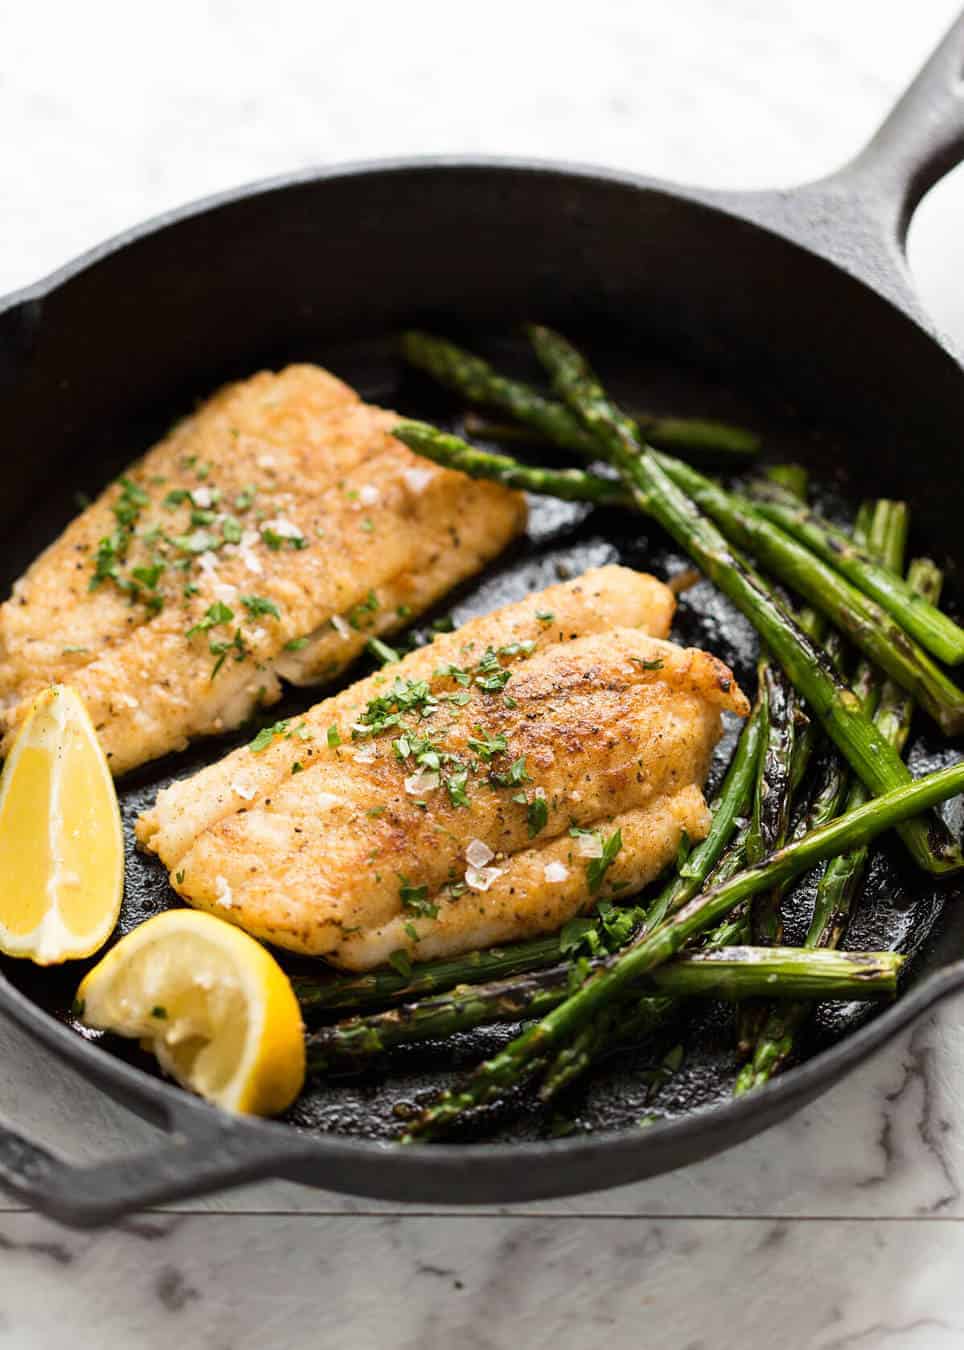 Making Crispy Pan Fried Fish without deep frying is simple - and so good! recipetineats.com